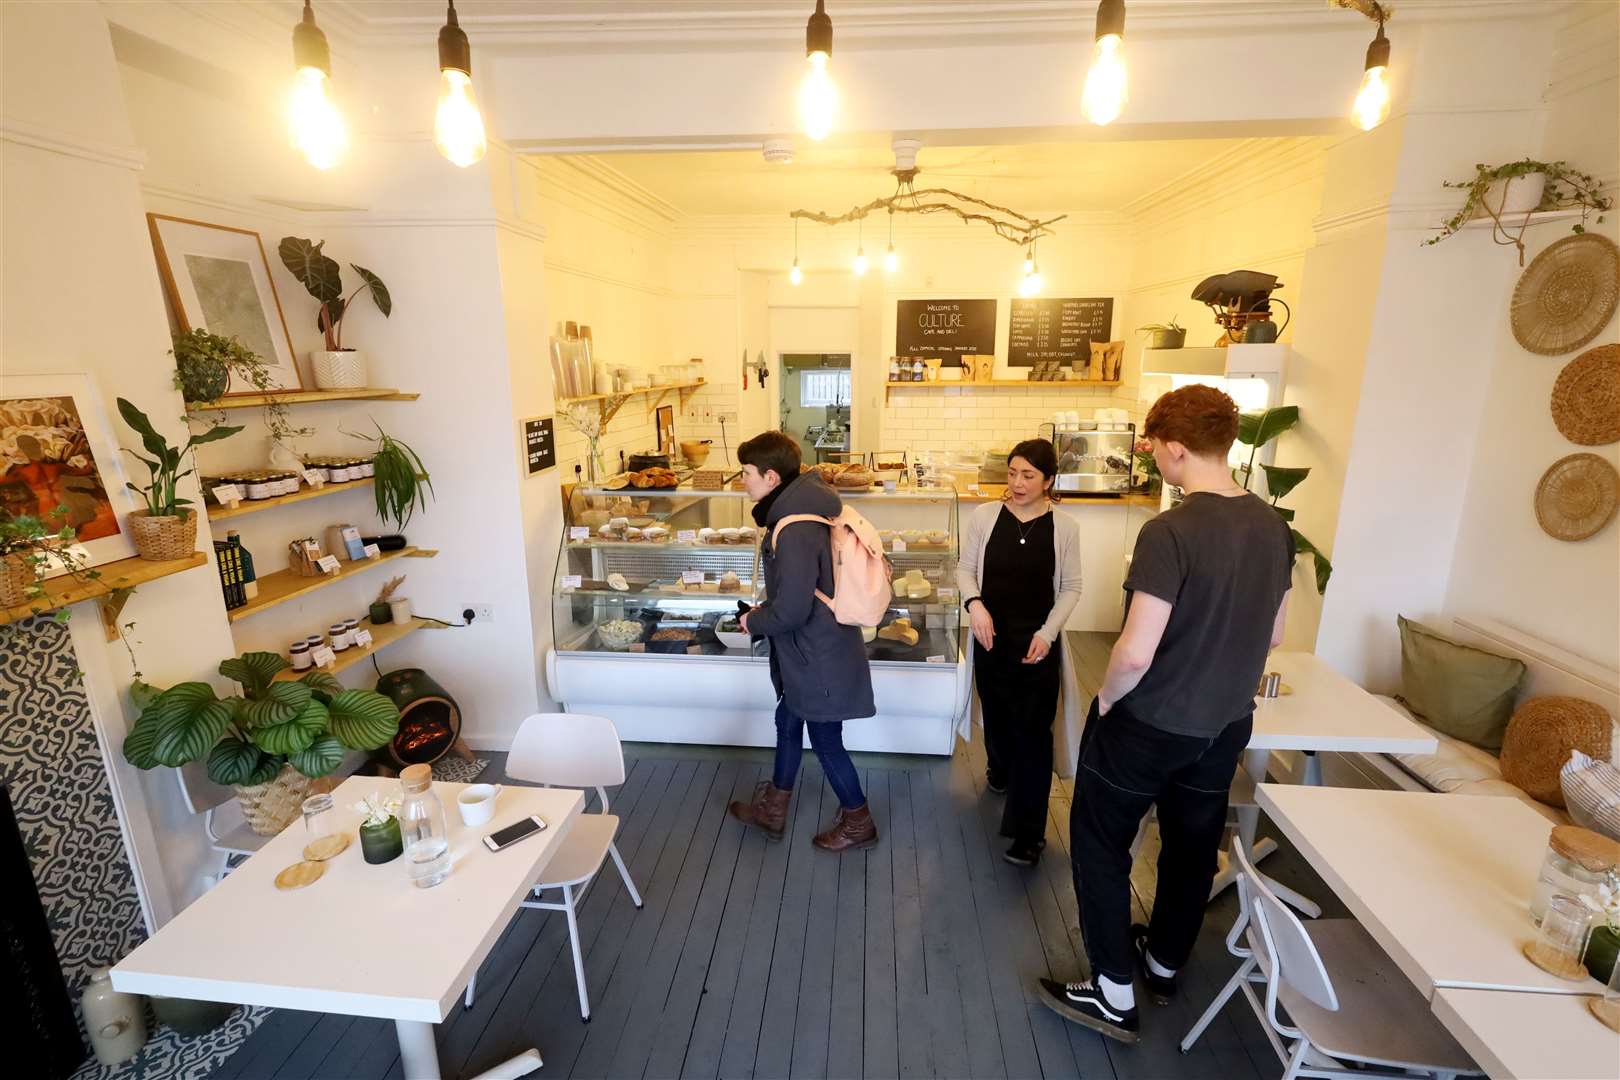 People can expect nourishing, colourful, plant-based food at Culture Cafe and Deli. Picture: James Mackenzie.